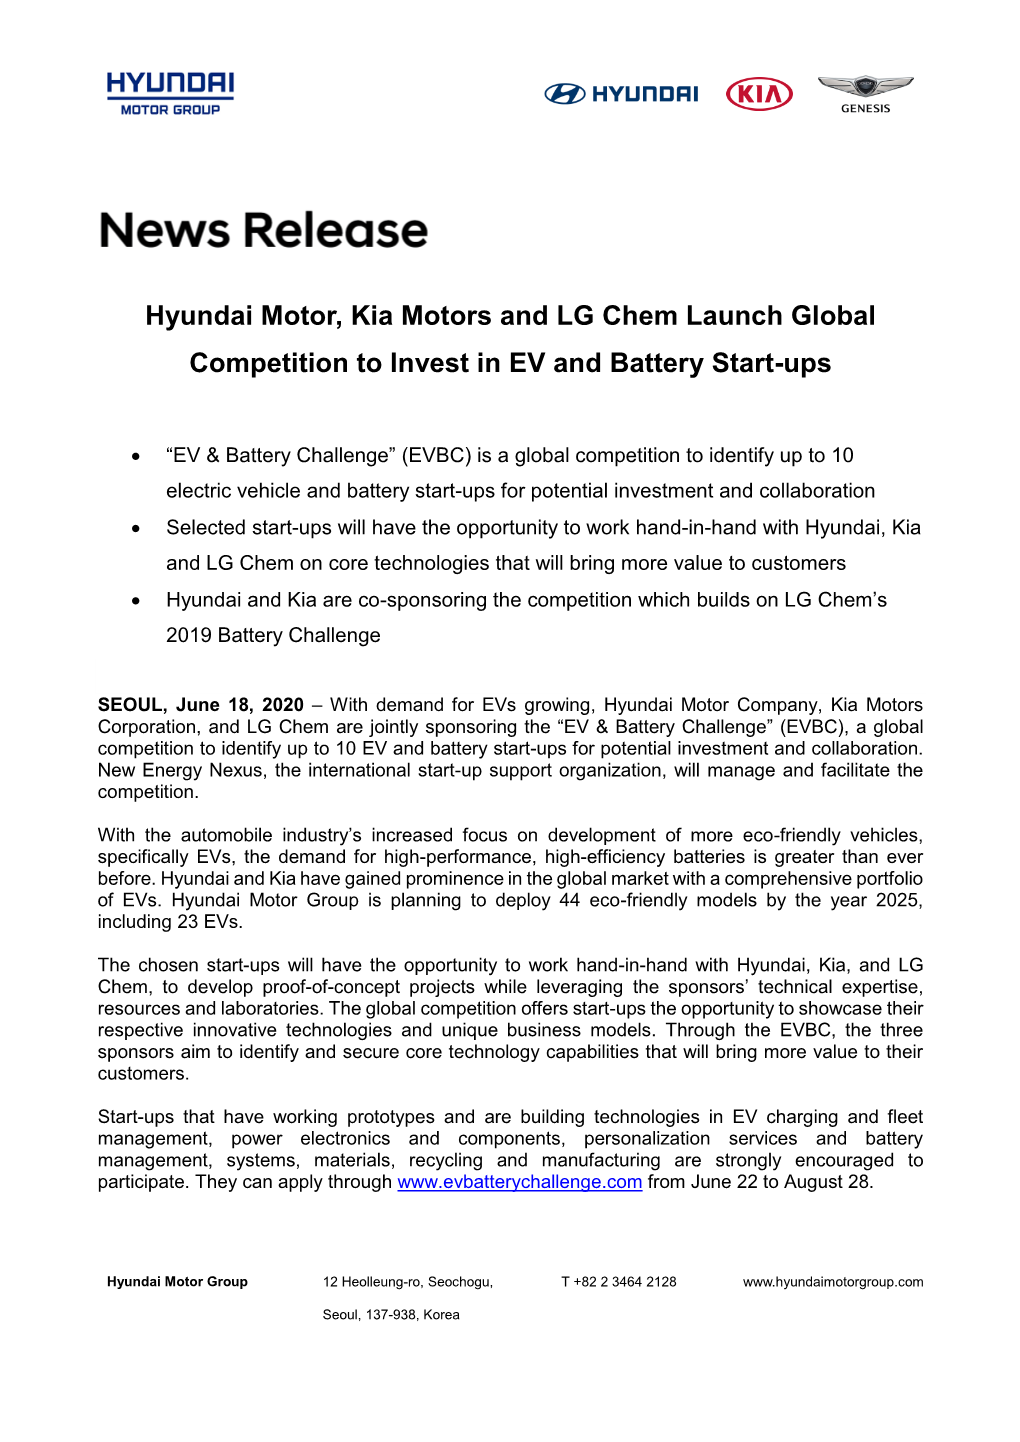 Hyundai Motor, Kia Motors and LG Chem Launch Global Competition to Invest in EV and Battery Start-Ups